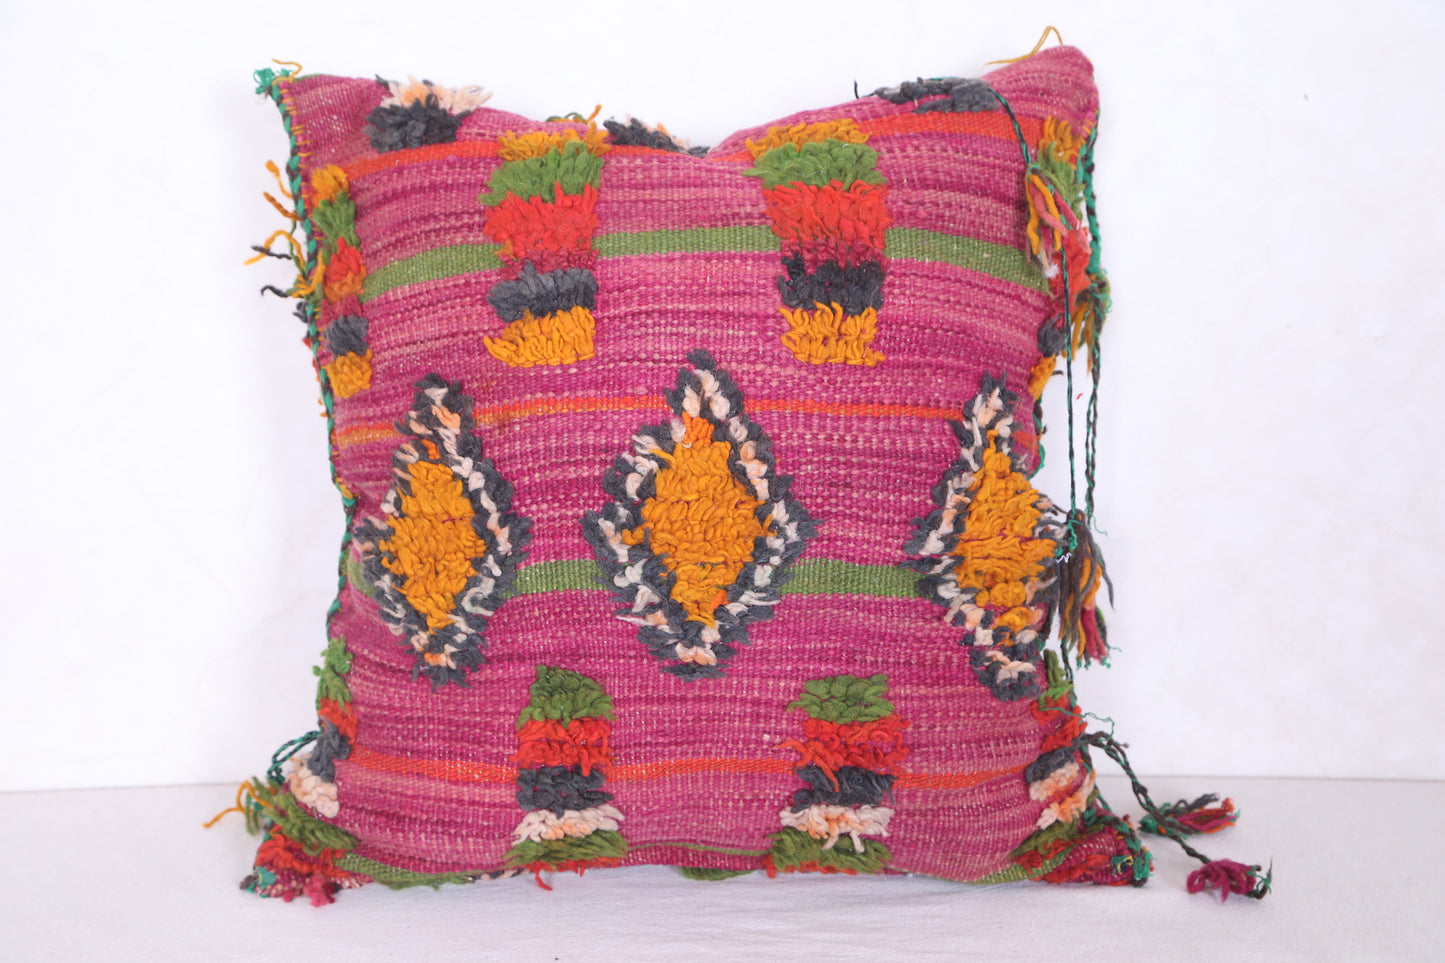 Moroccan handmade rug pillows 20.4 INCHES X 19.6 INCHES